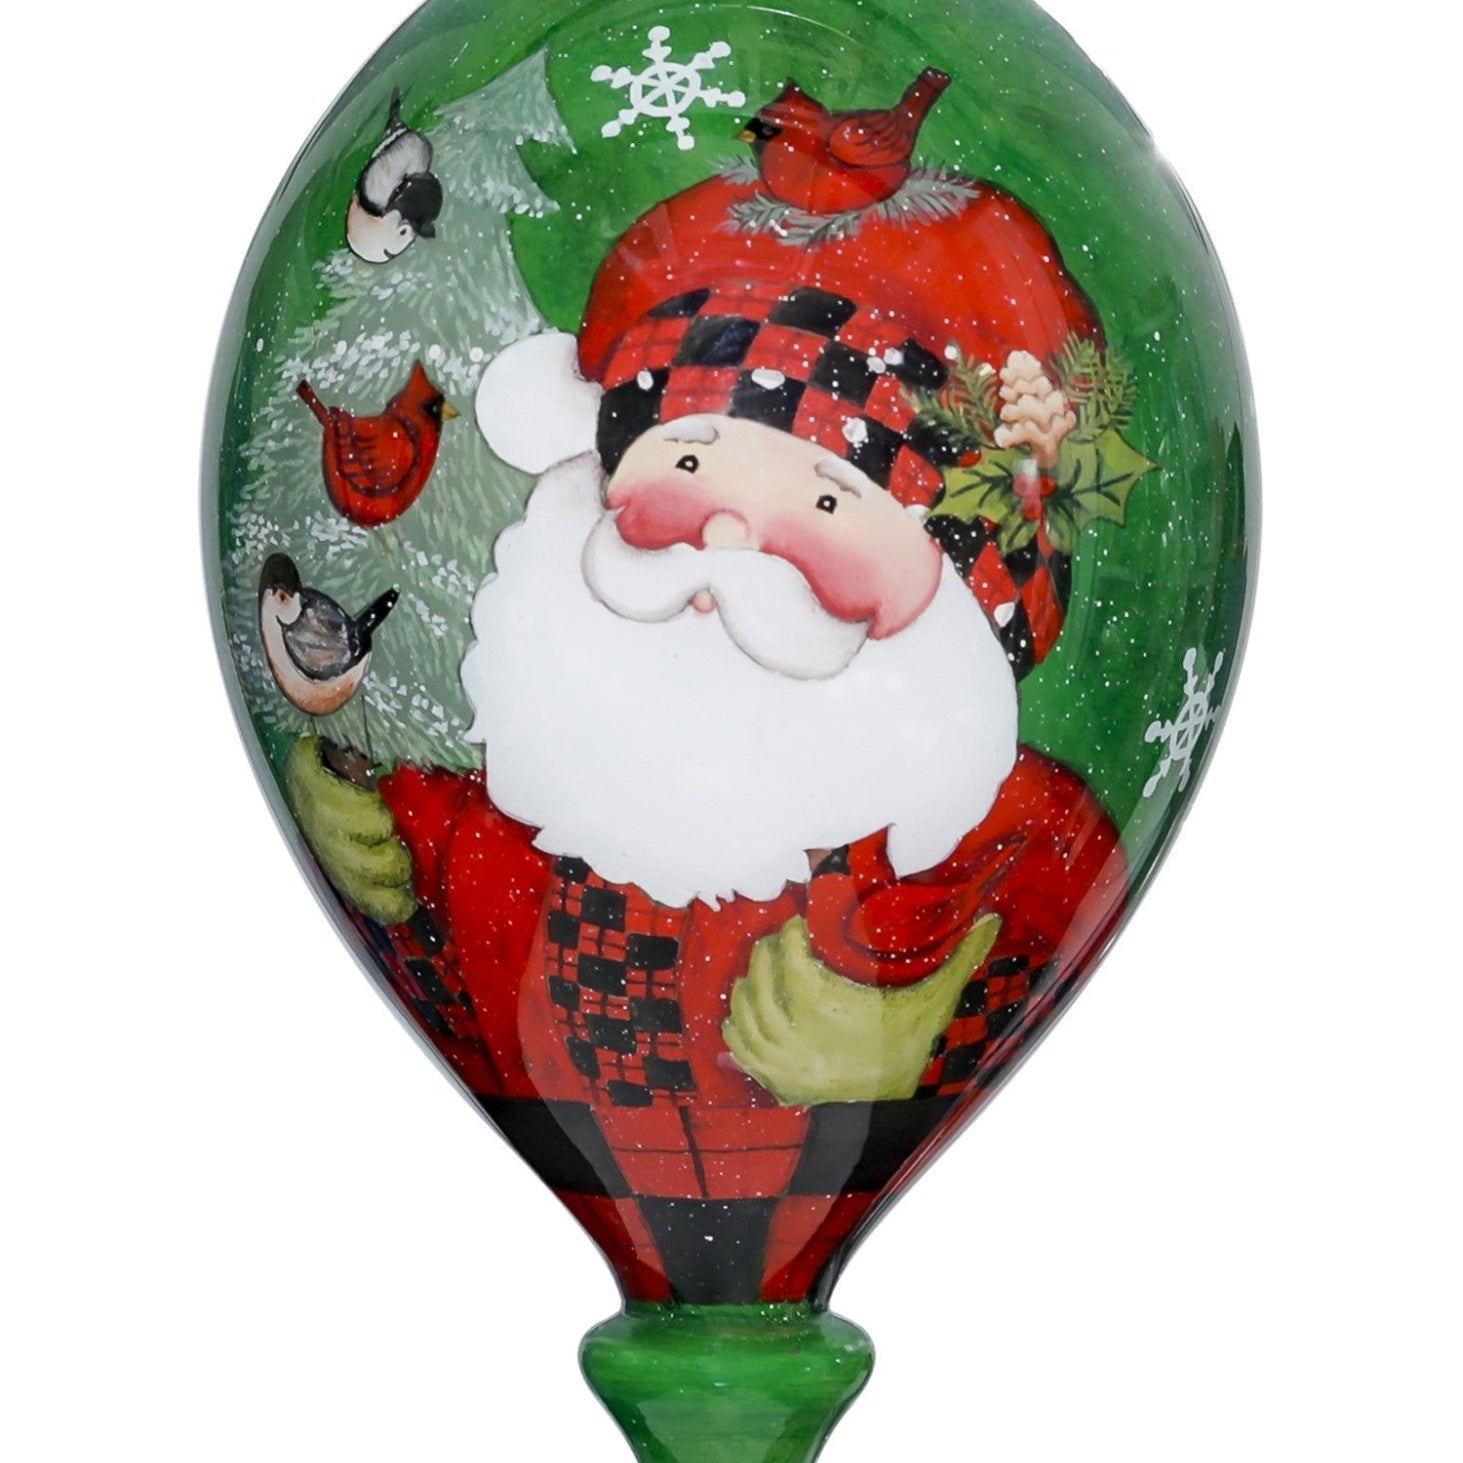 Plaid-Santa-with-Cardinals-Hand-Painted-Mouth-Blown-Glass-Ornament-Christmas-Ornaments